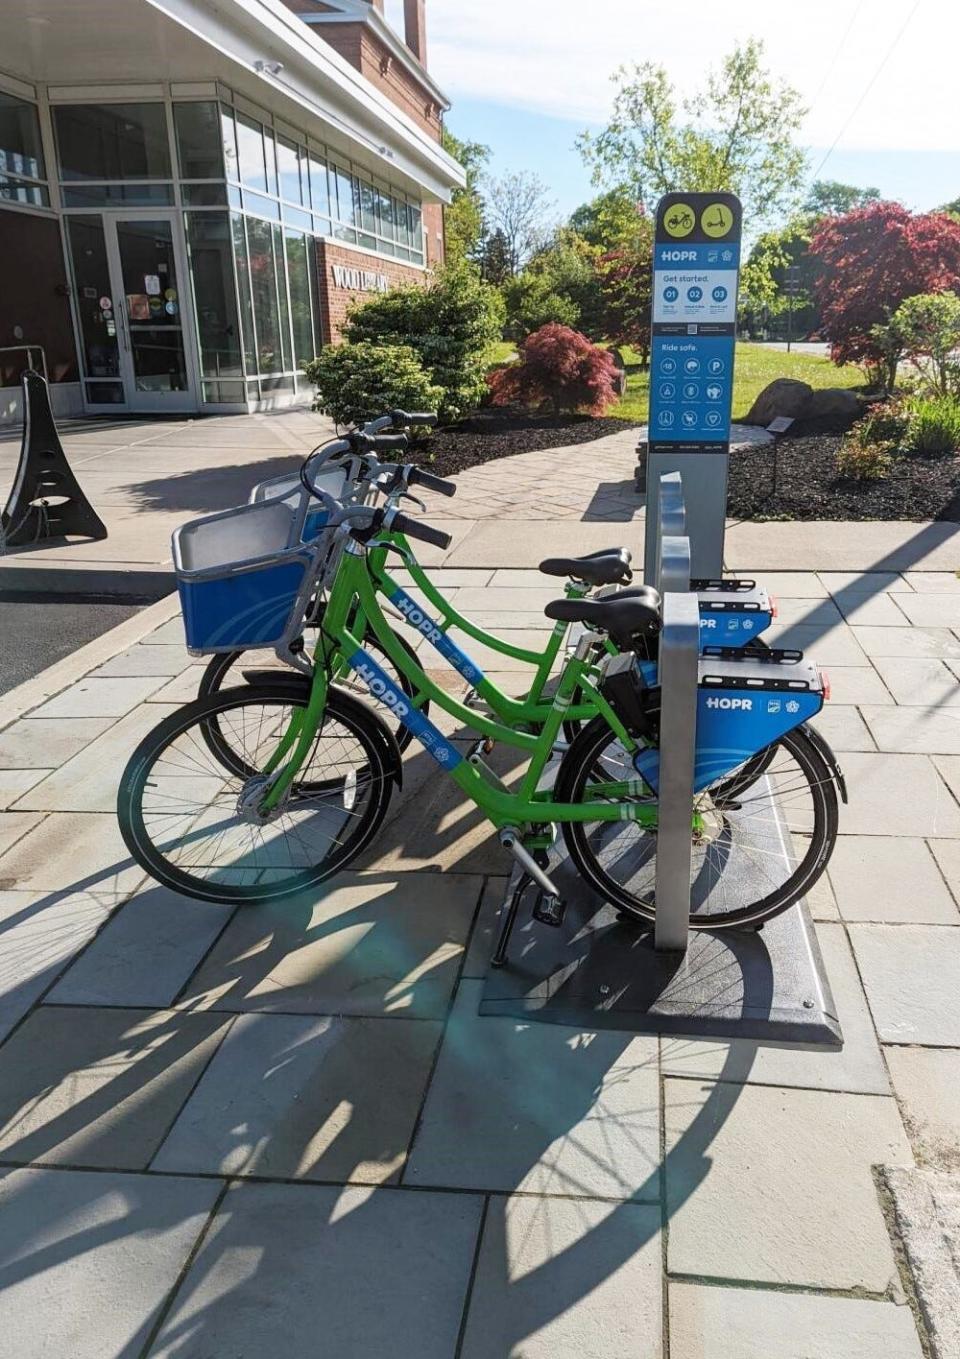 Canandaigua is now in the bike-share game, with stations around the city, including here at Wood Library, and at Finger Lakes Community College.